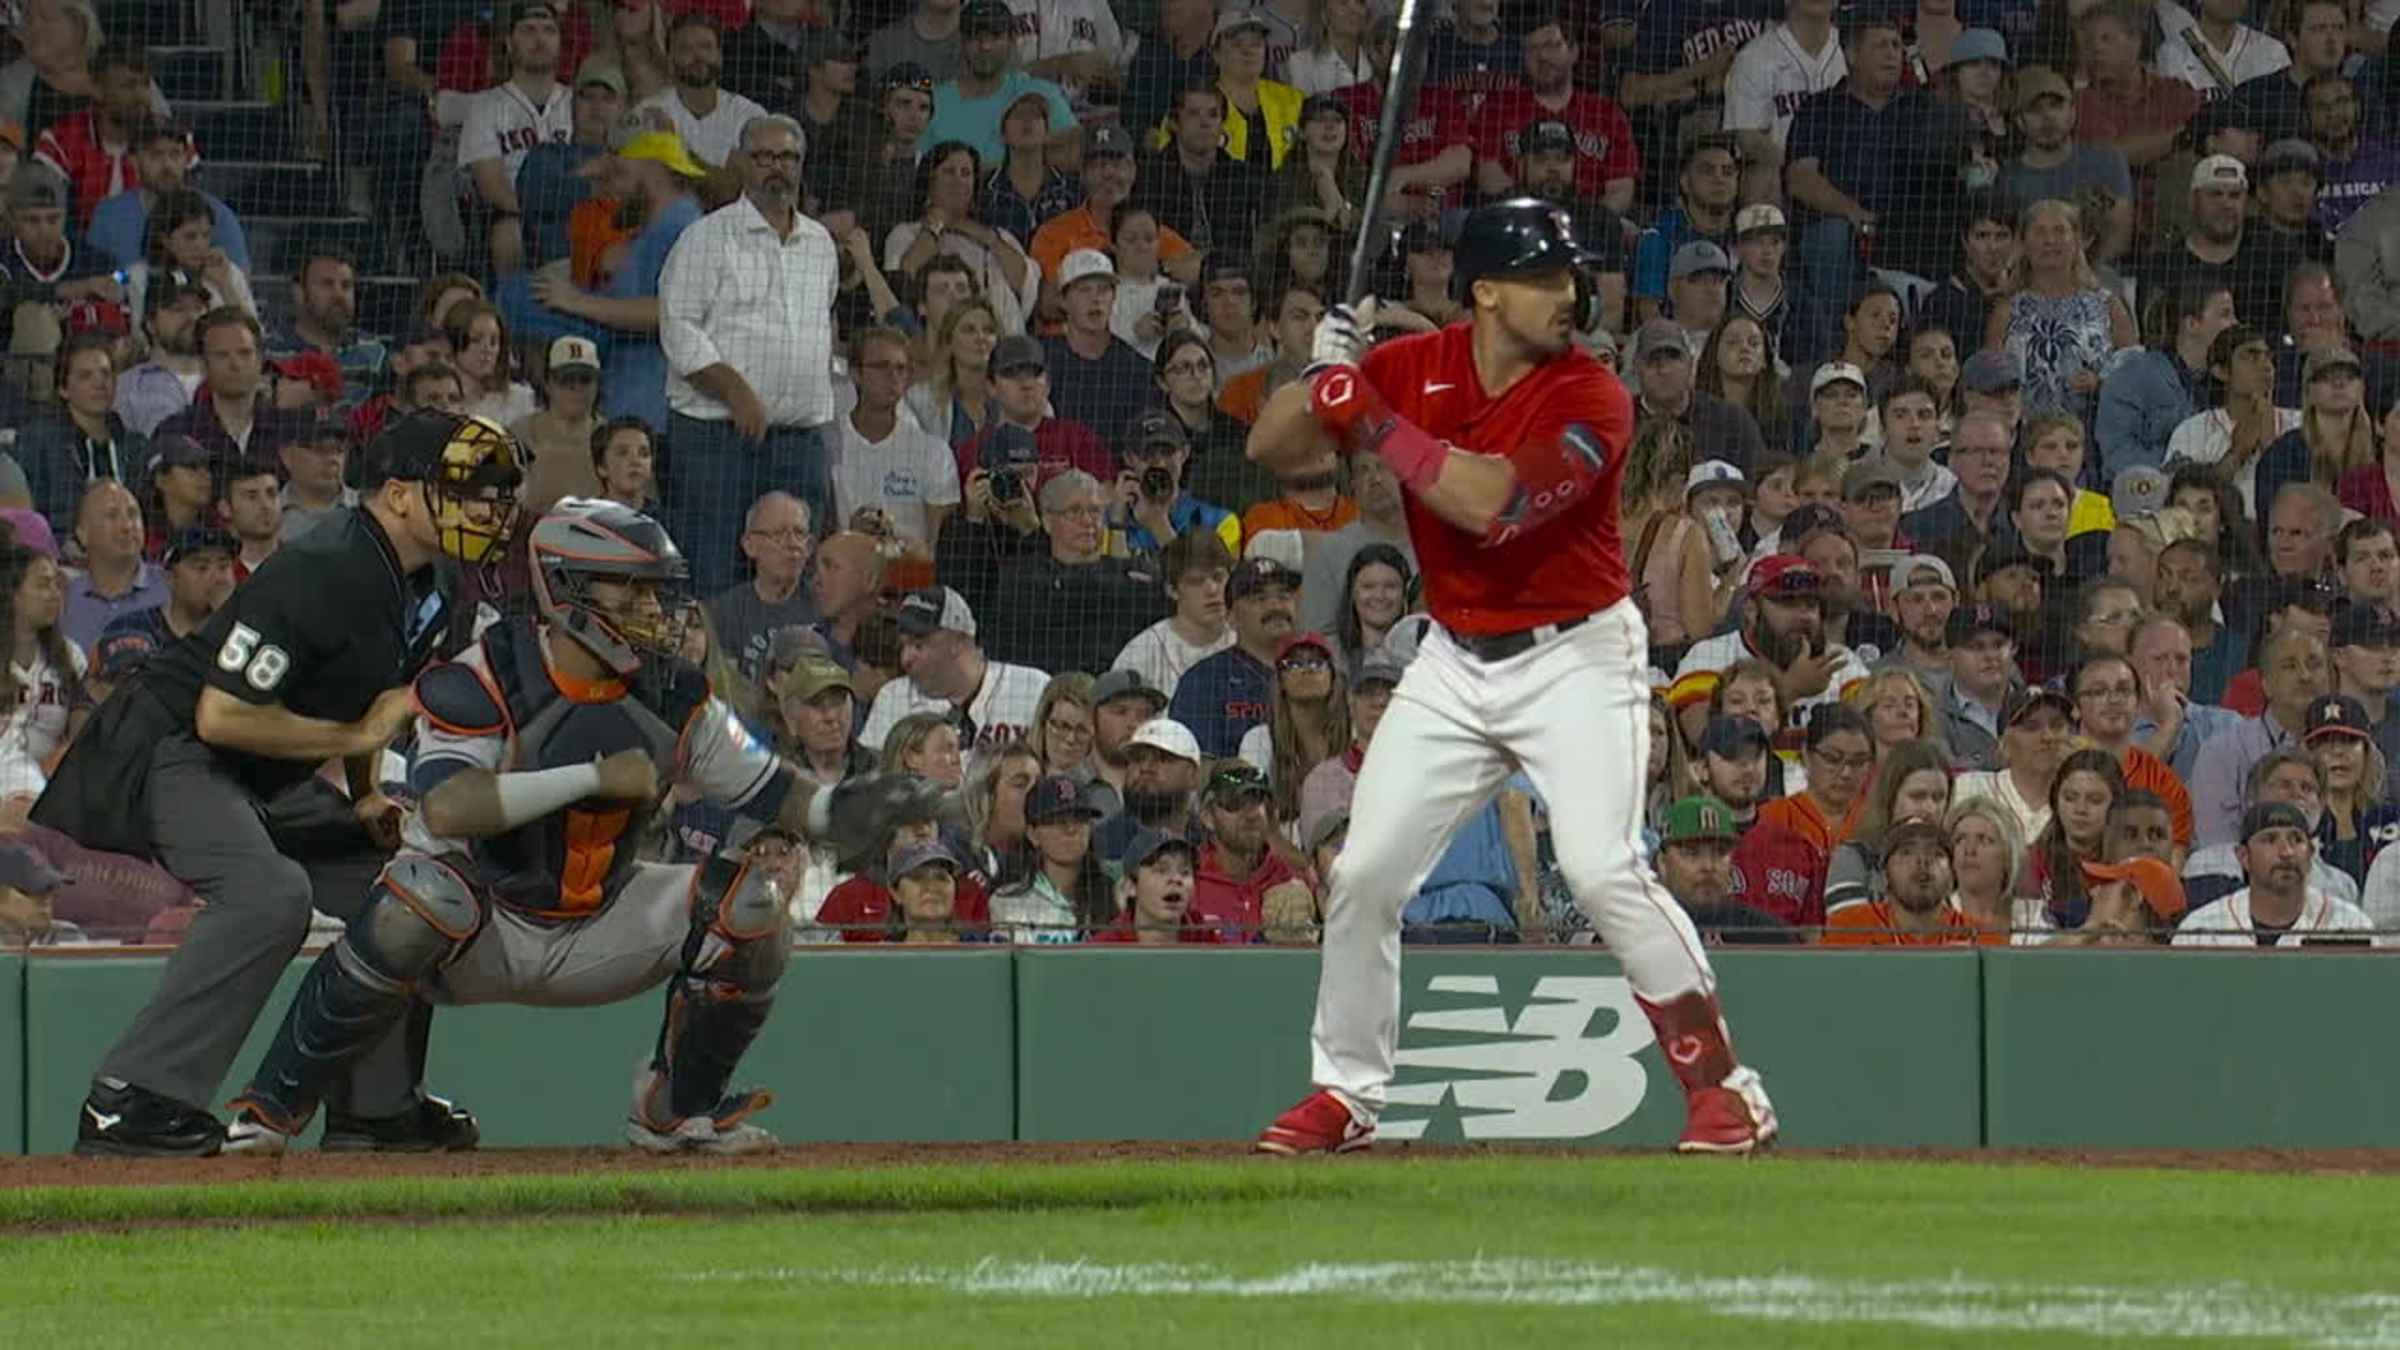 Adam Duvall hits 3 home runs for second time in 2020